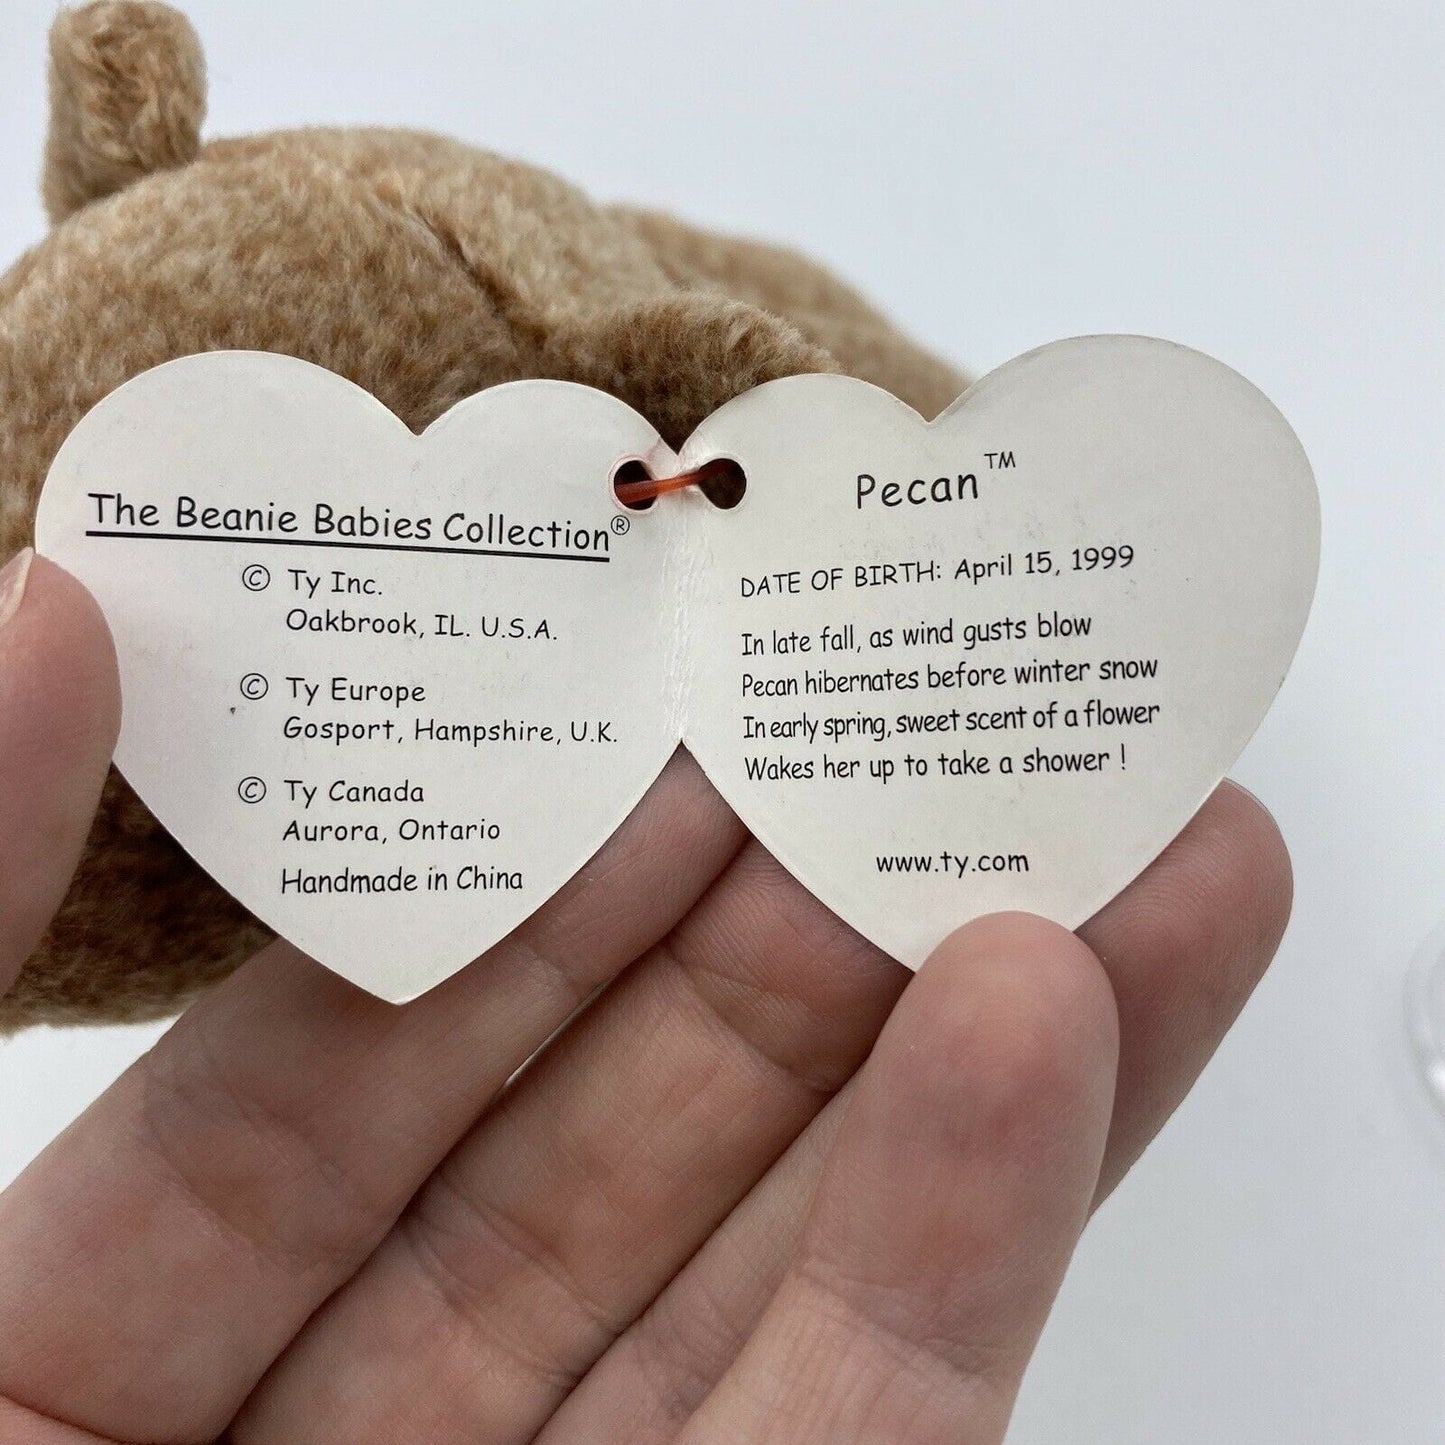 Ty Original Beanie Babies - “Pecan” The Bear - 1999 MINT Condition - Tag Errors